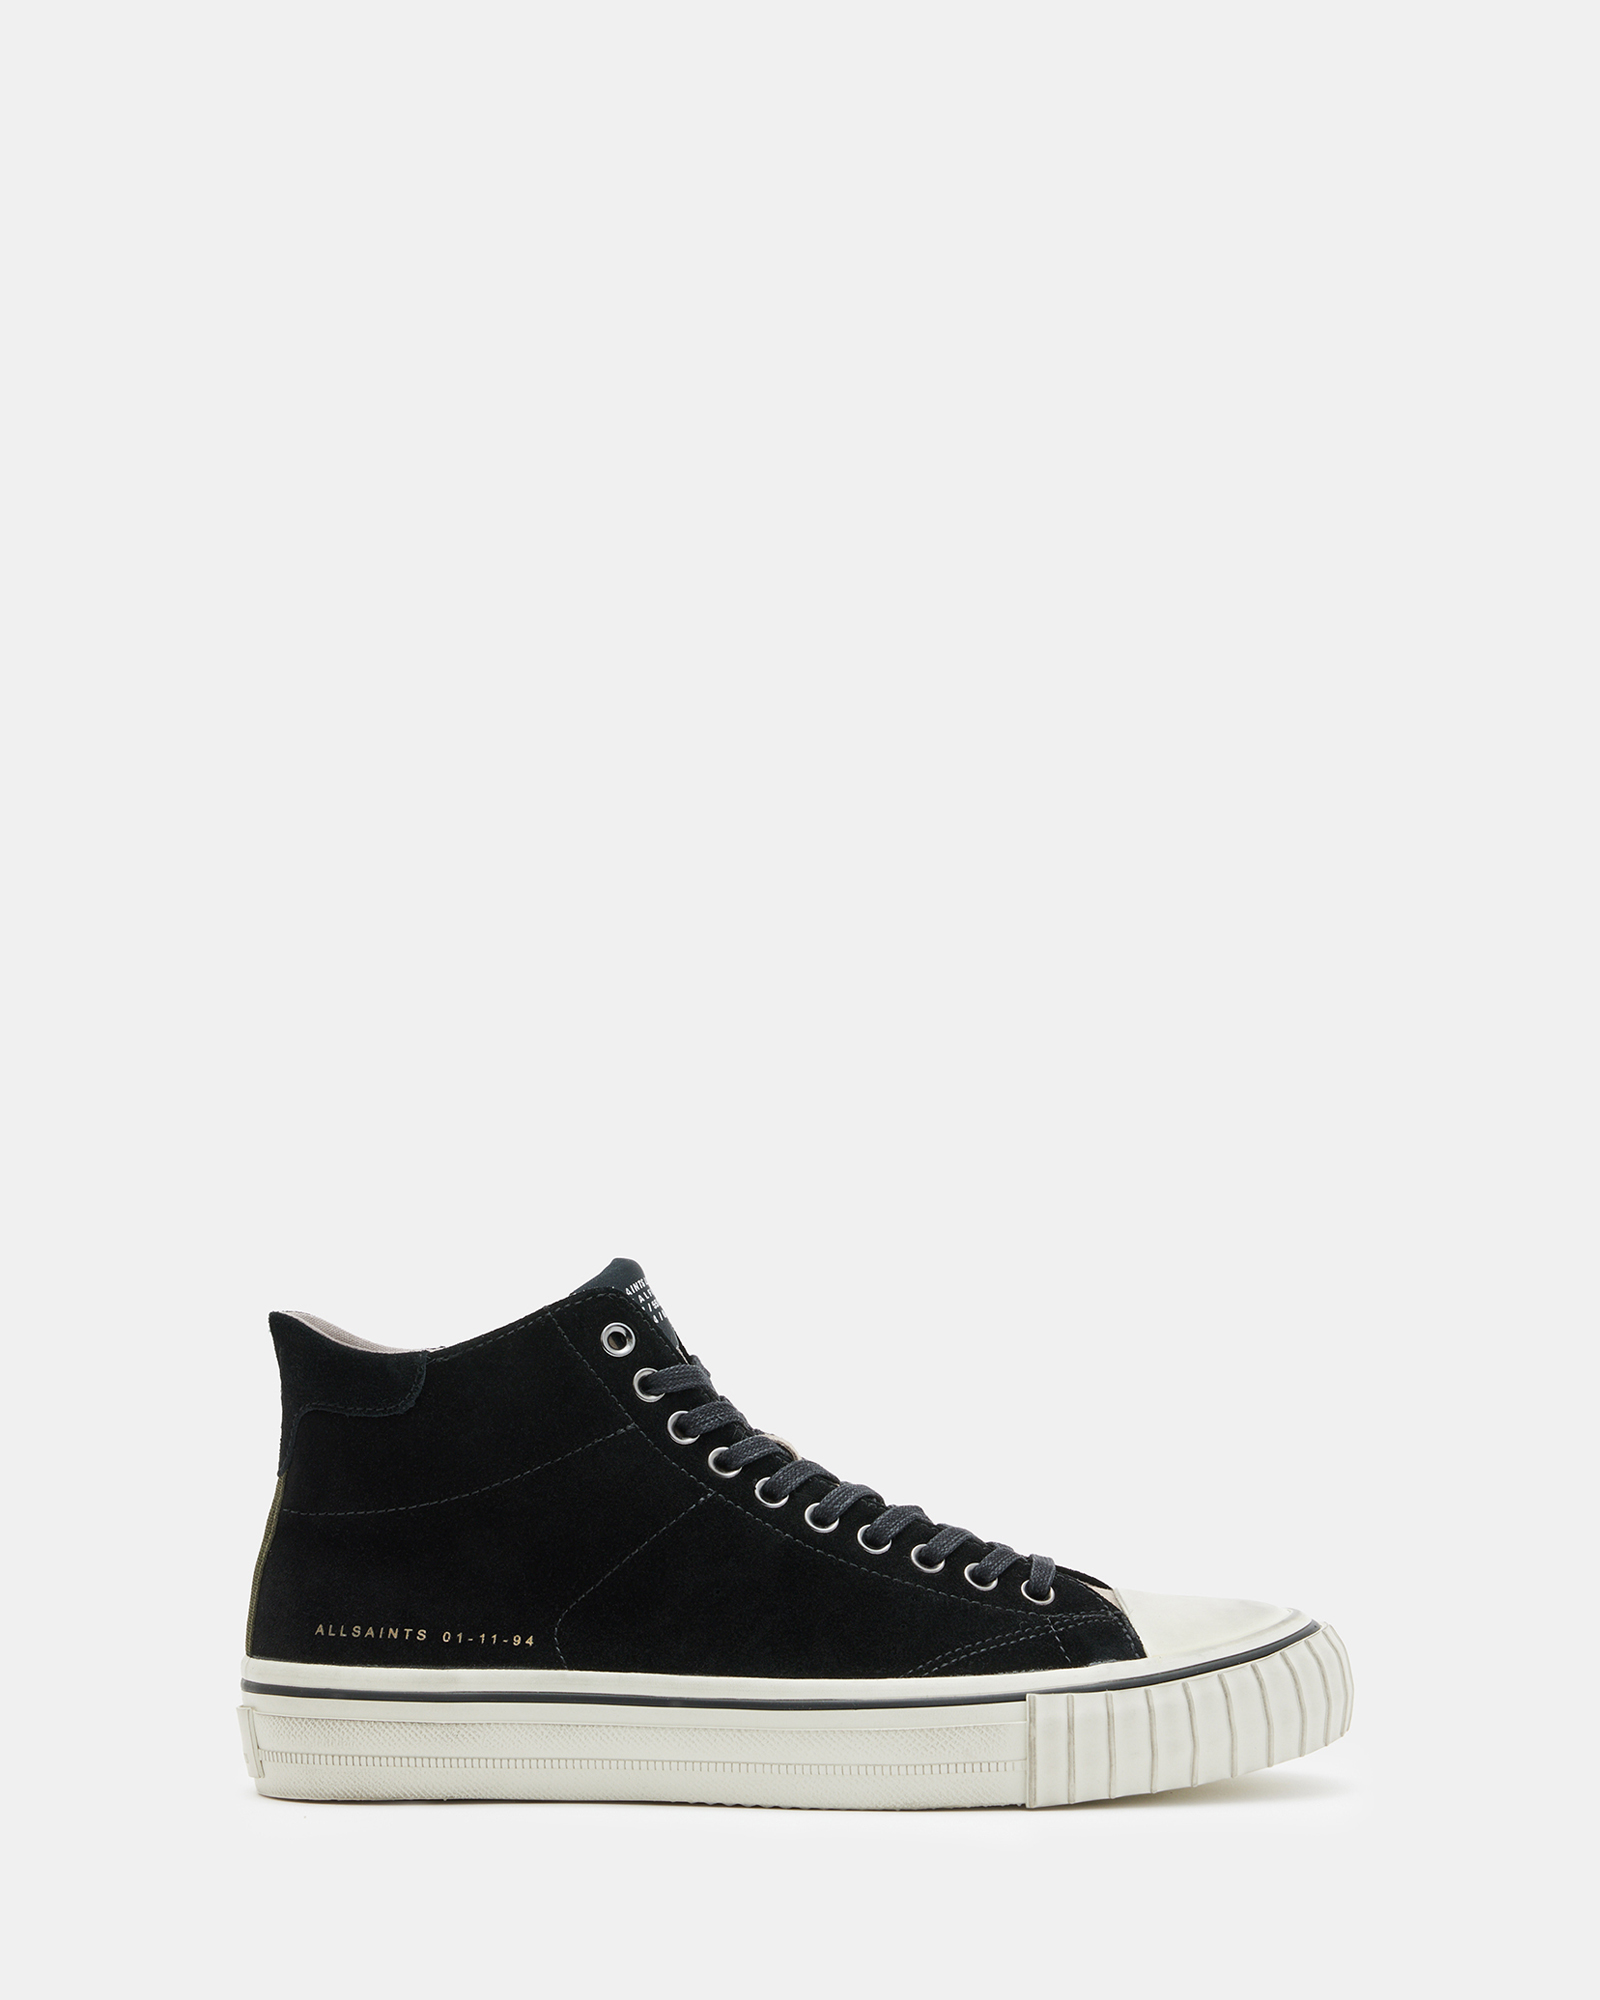 Allsaints Lewis Lace Up Leather High Top Sneakers In Black